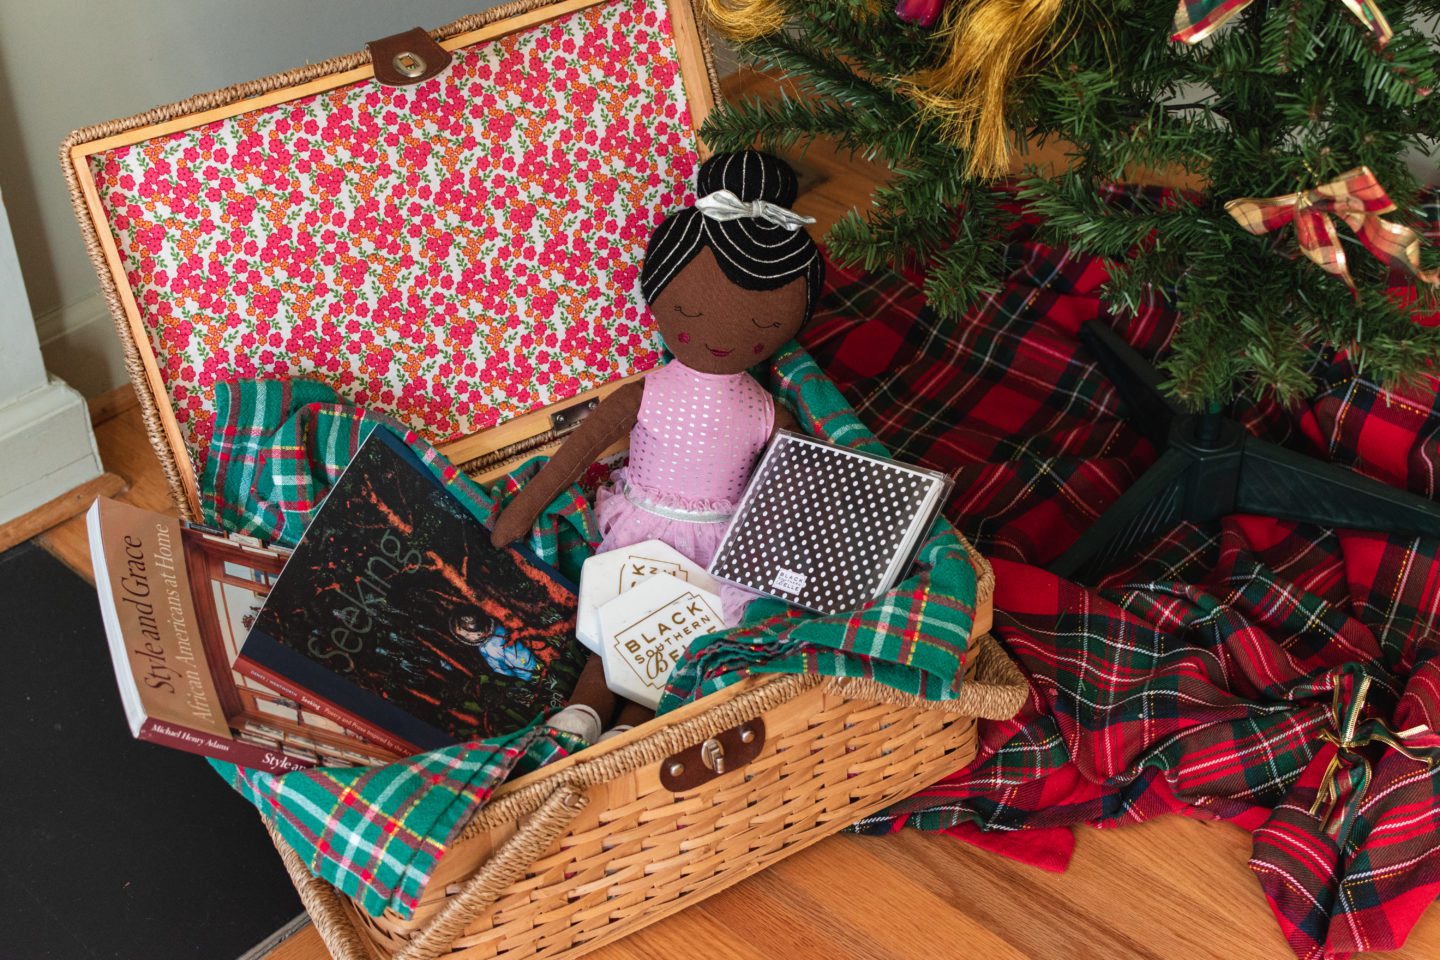 Holidays with Heritage: Black-Owned Gift Baskets for Giving Back